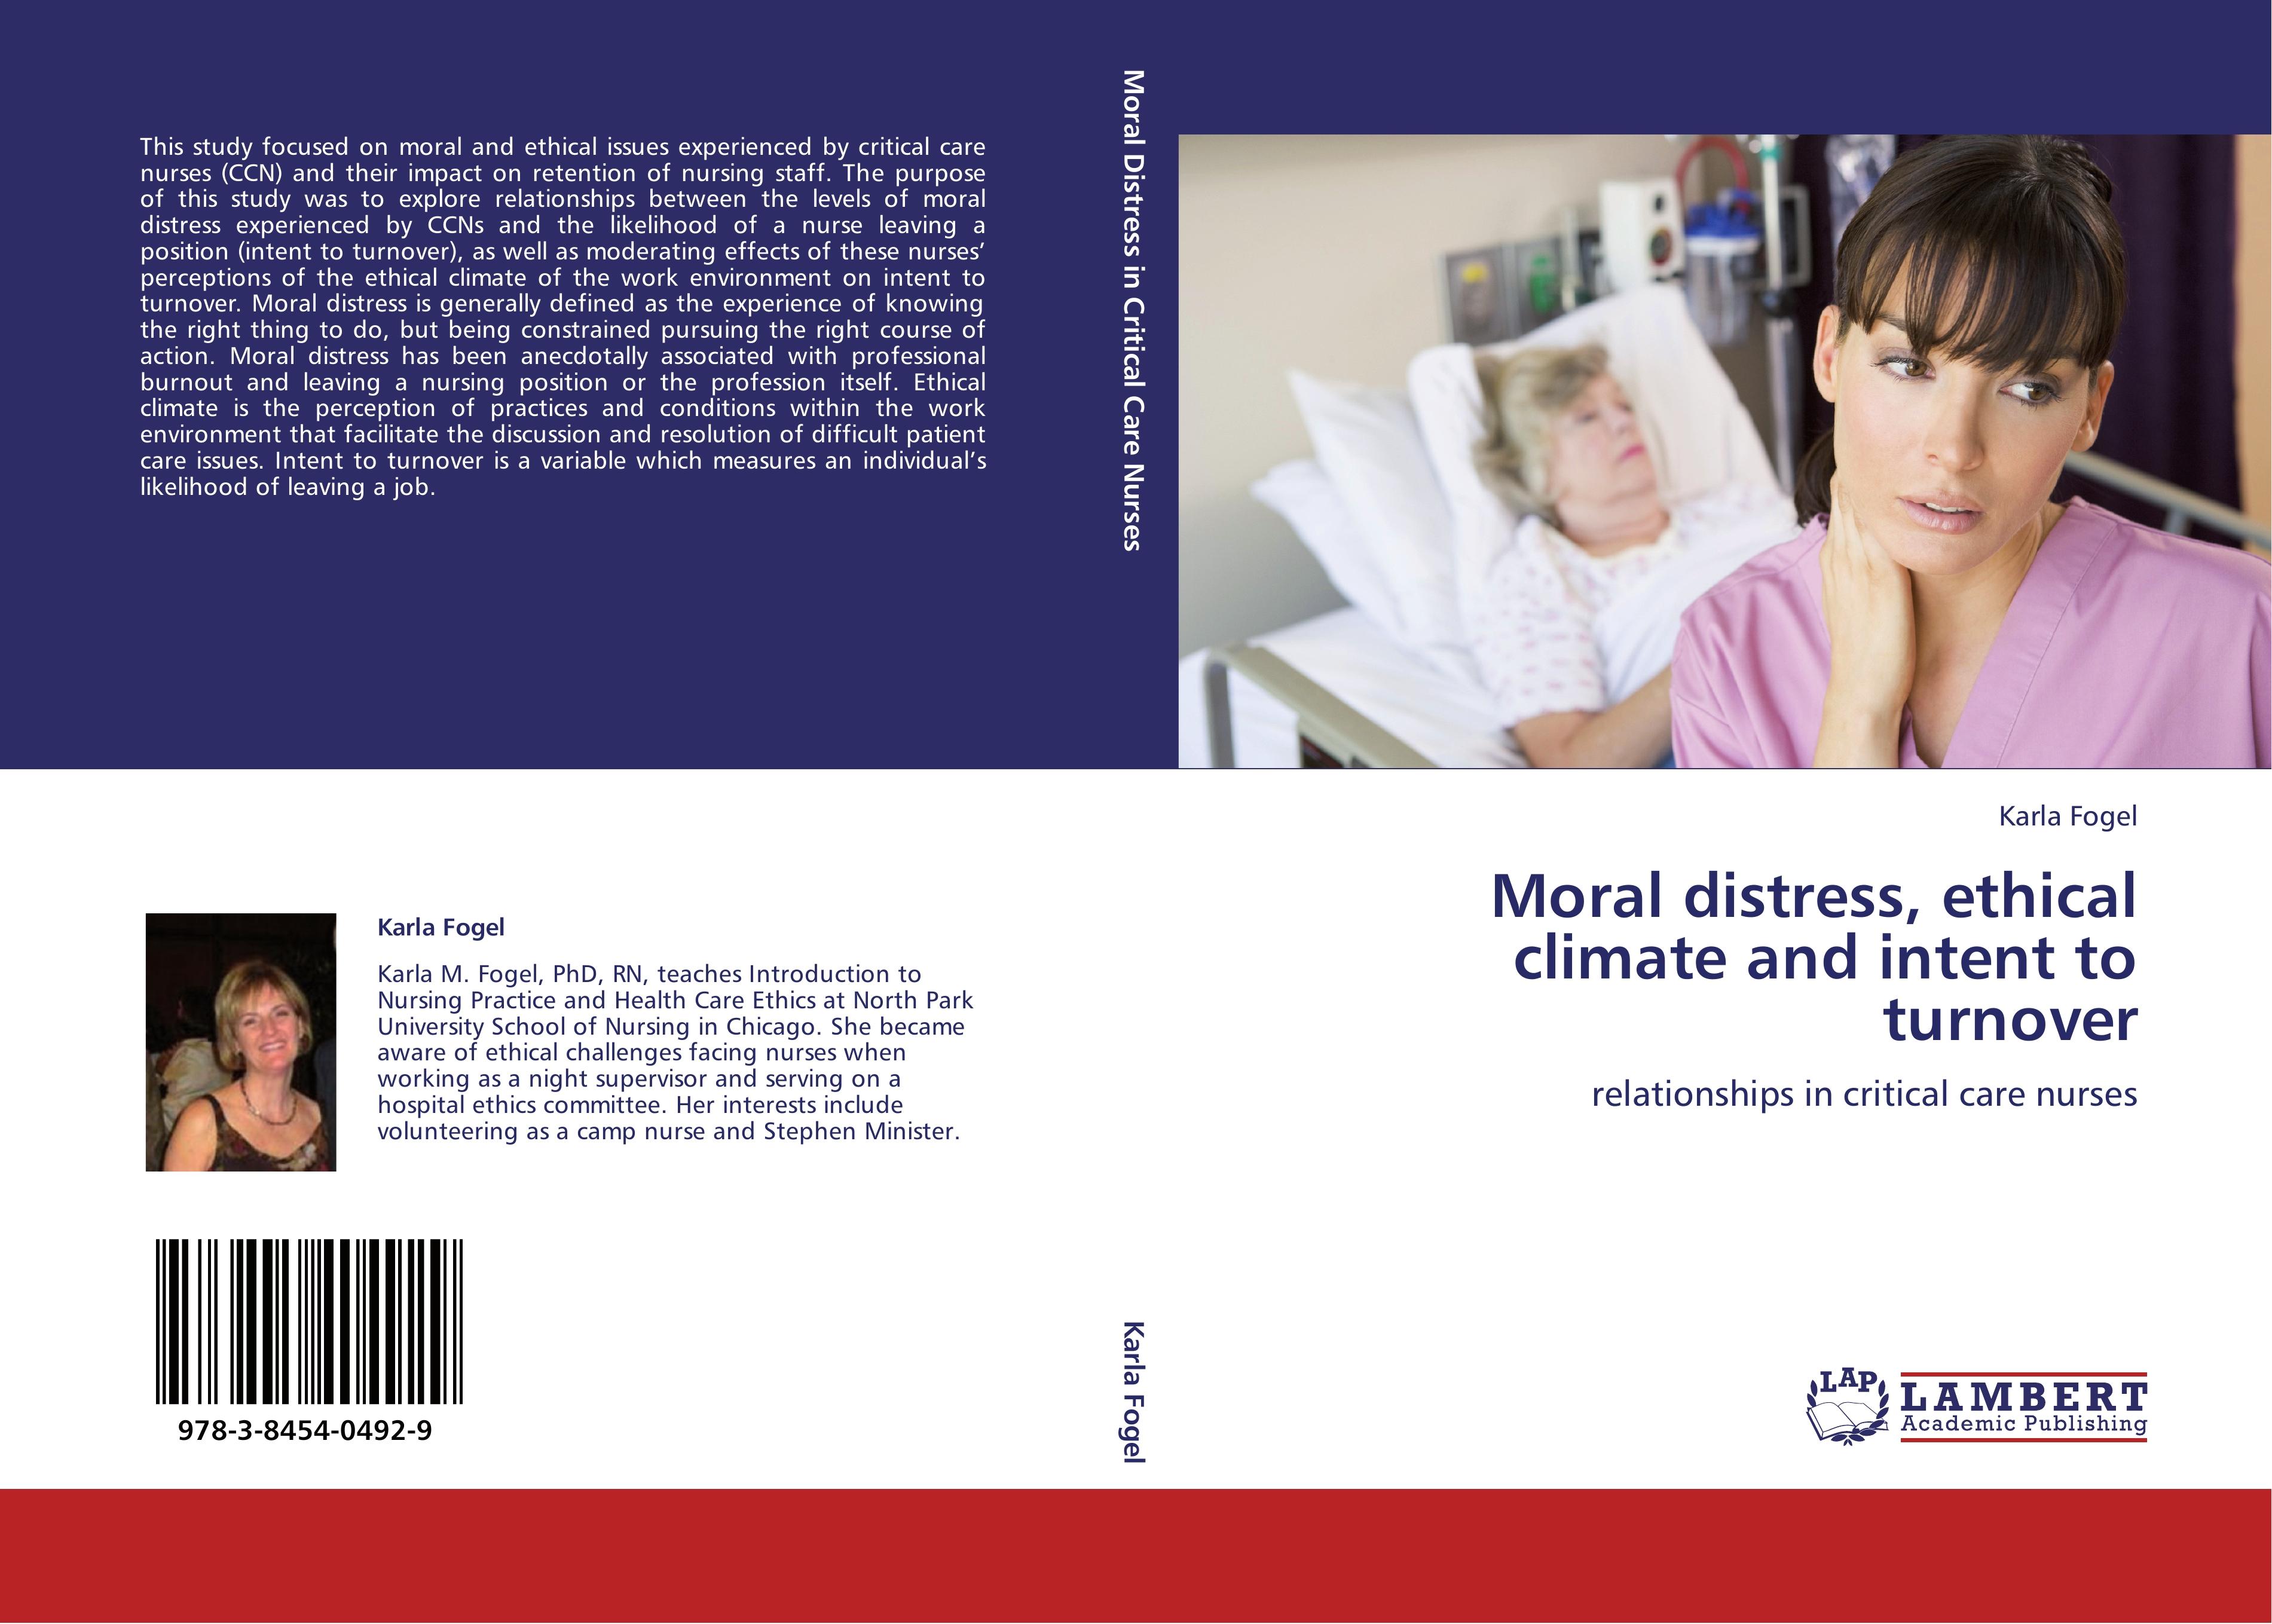 Moral distress, ethical climate and intent to turnover - Karla Fogel